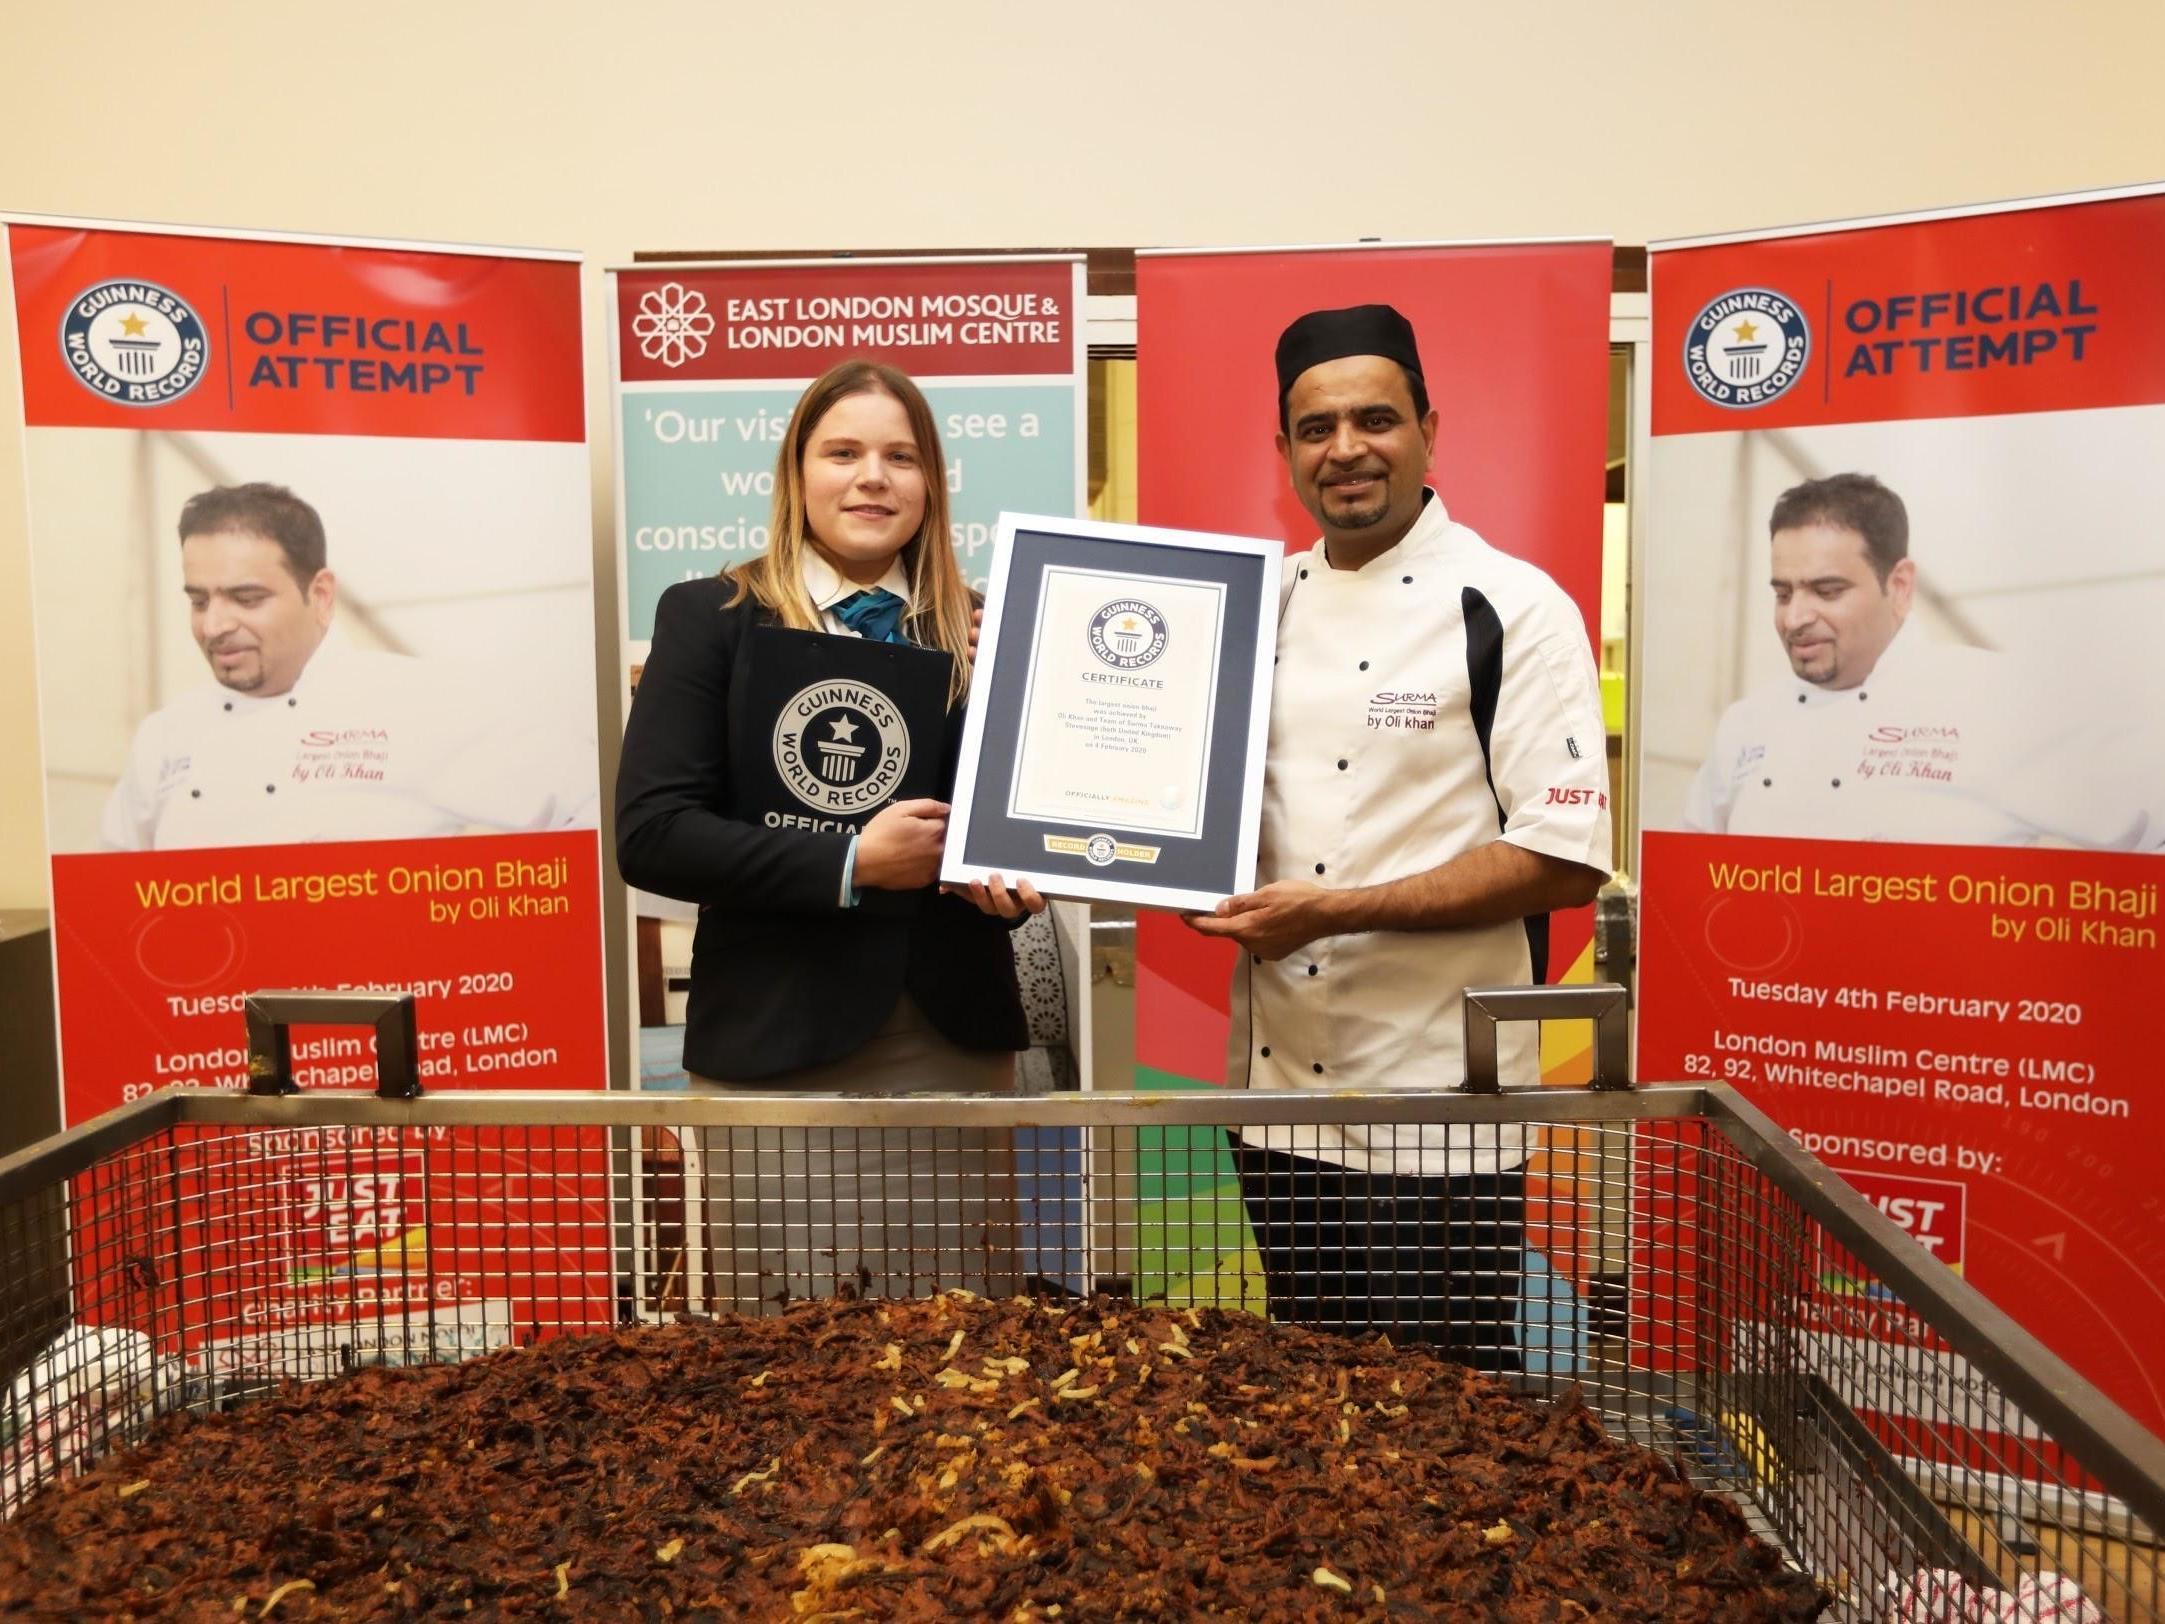 Guinness World Record: Chef feeds hundreds of homeless people in London with world's largest onion bhaji